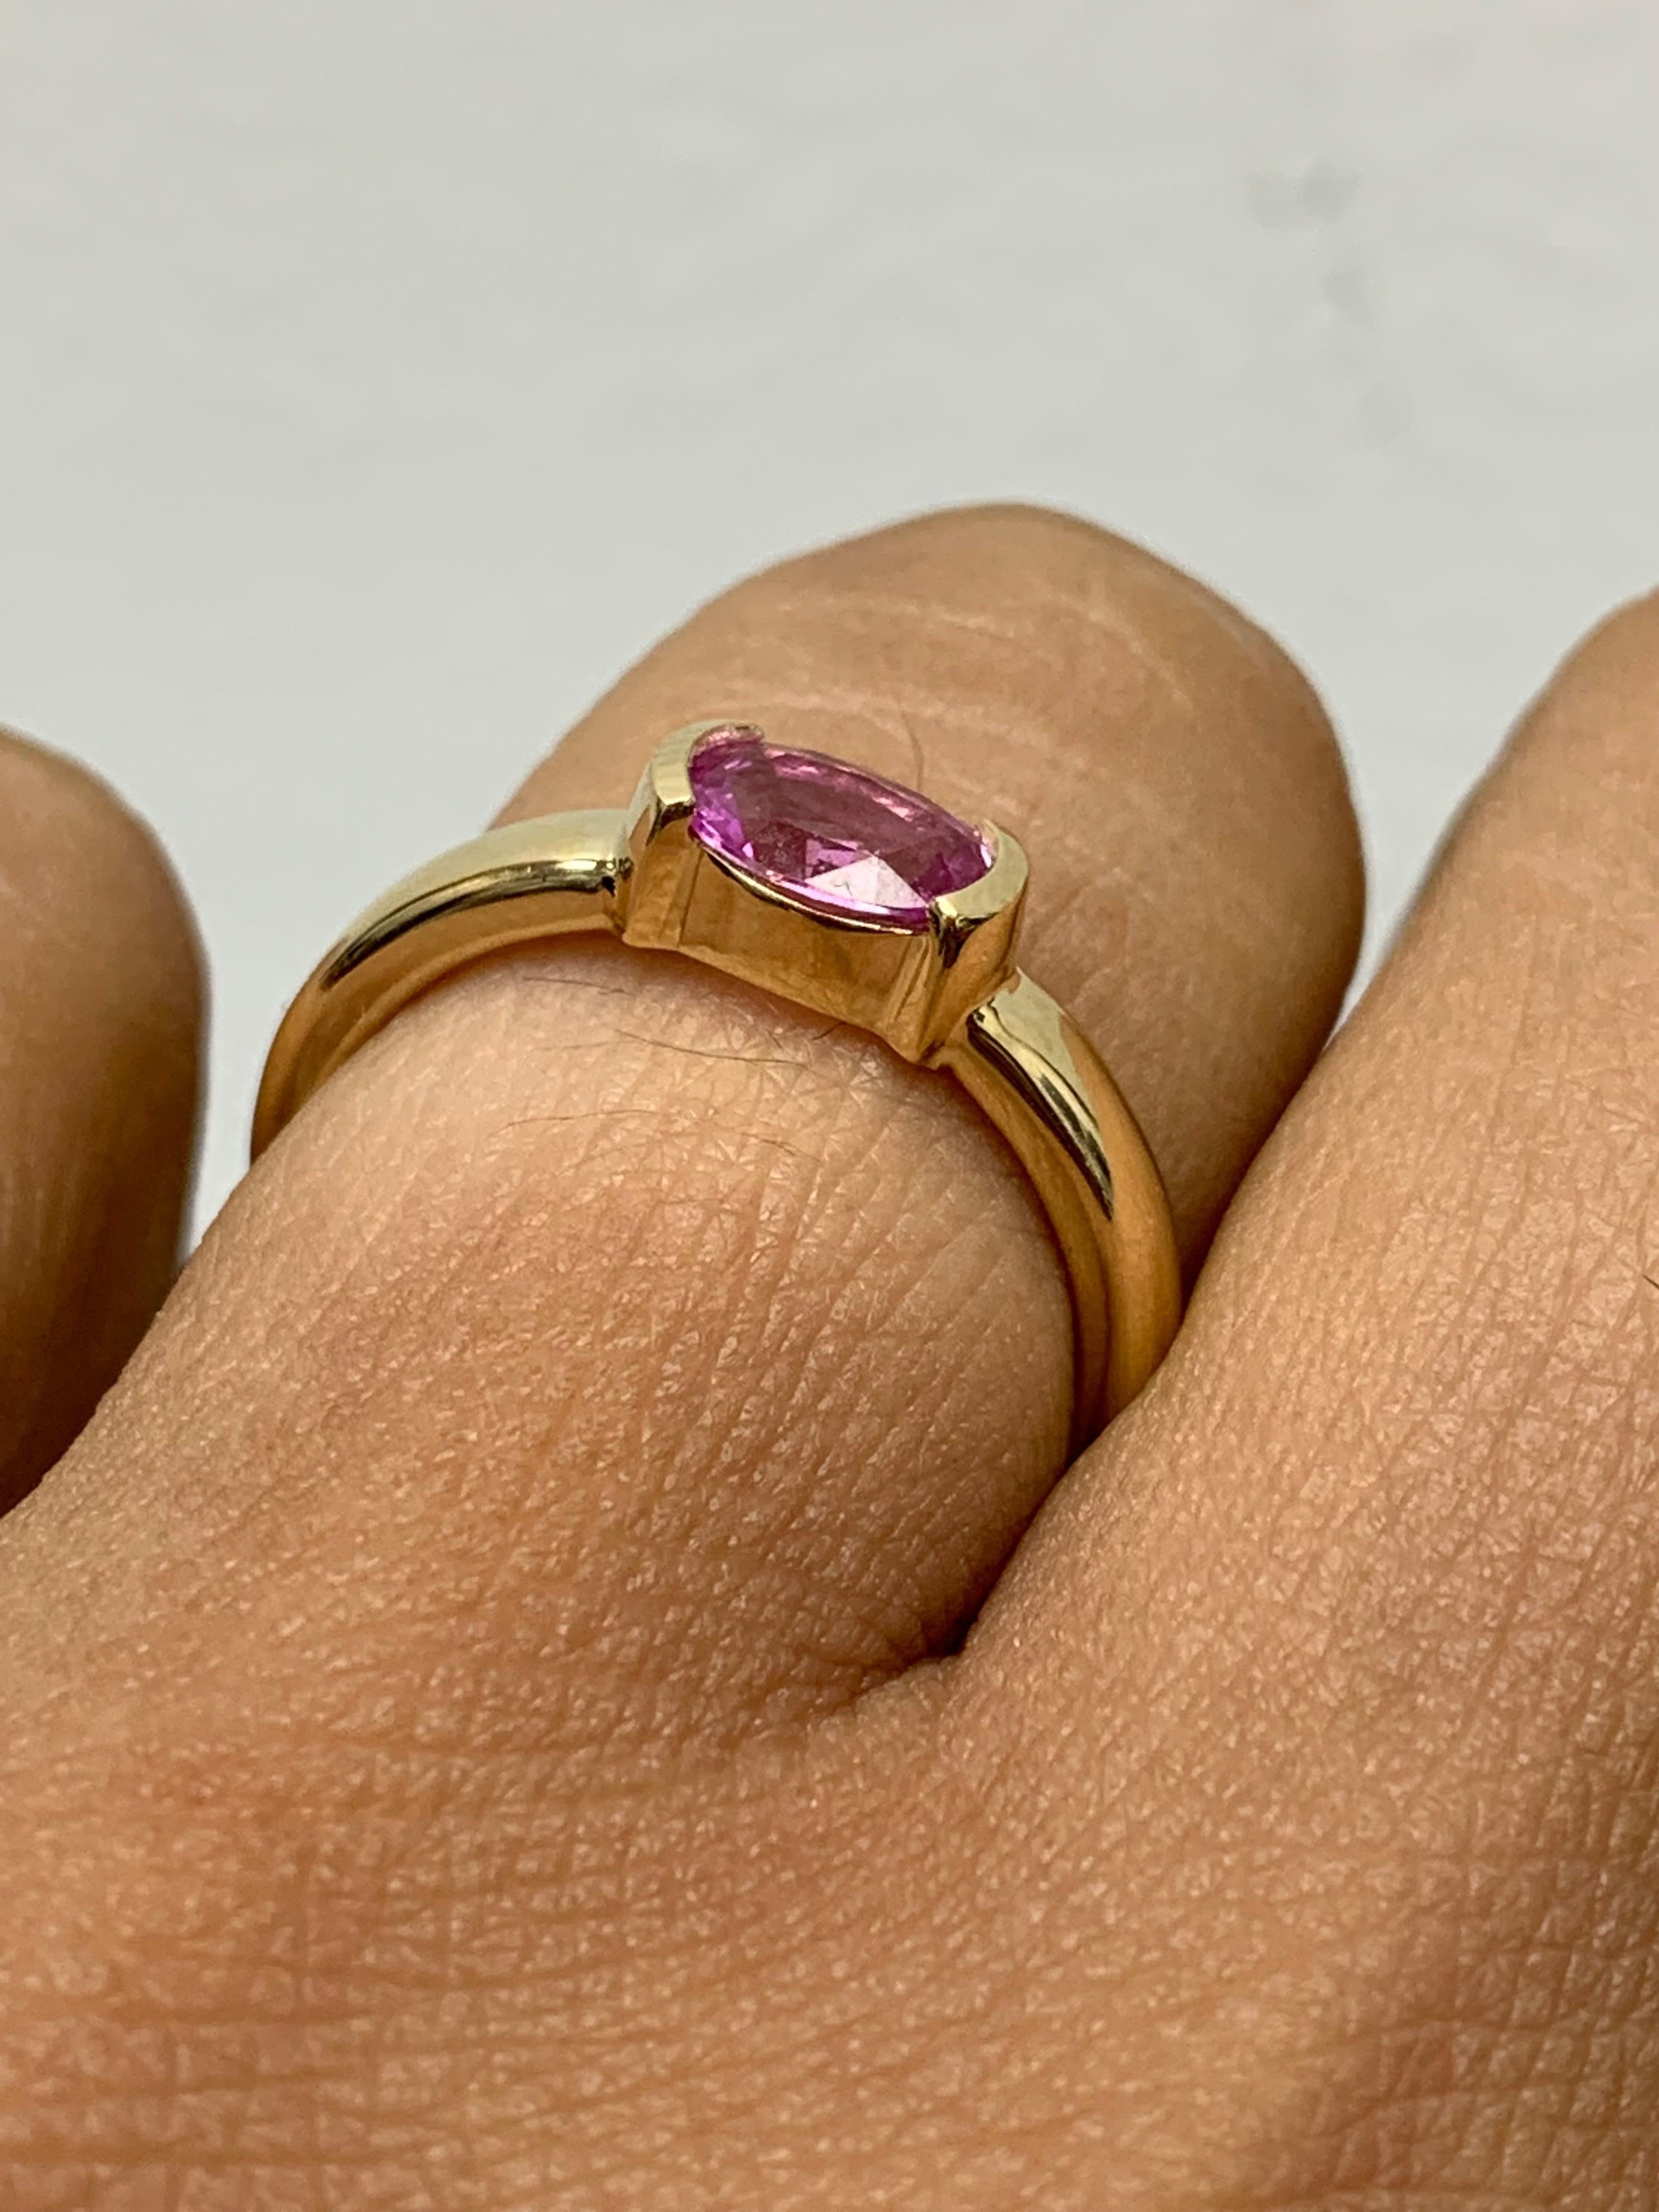 0.73 Carat Oval Cut Pink Sapphire Band Ring in 14K Yellow Gold For Sale 7